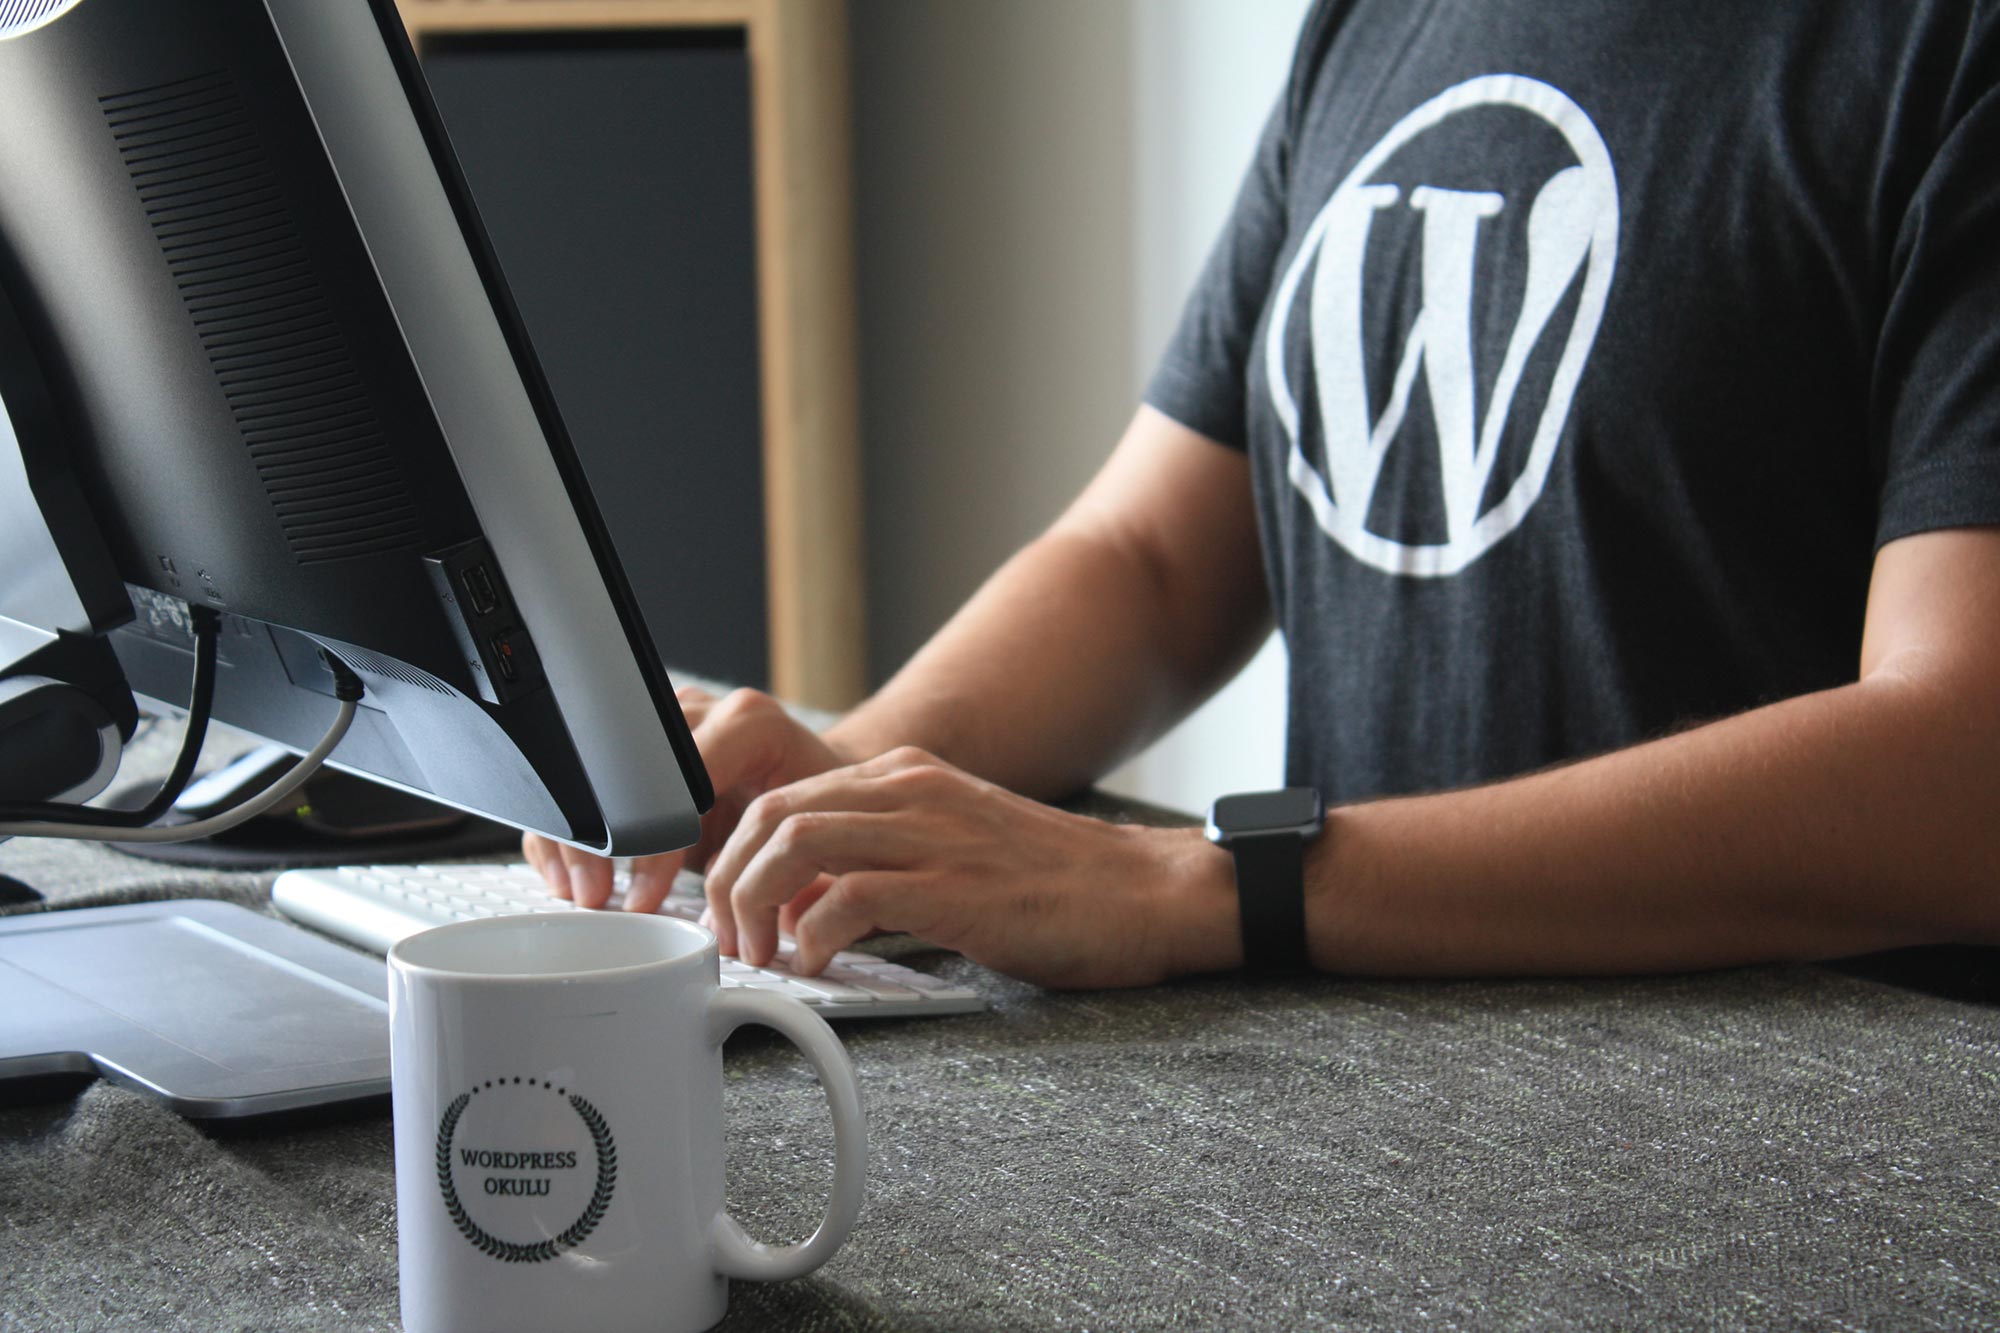 A person wearing a WordPress t-shirt standing at a desk and working on a computer